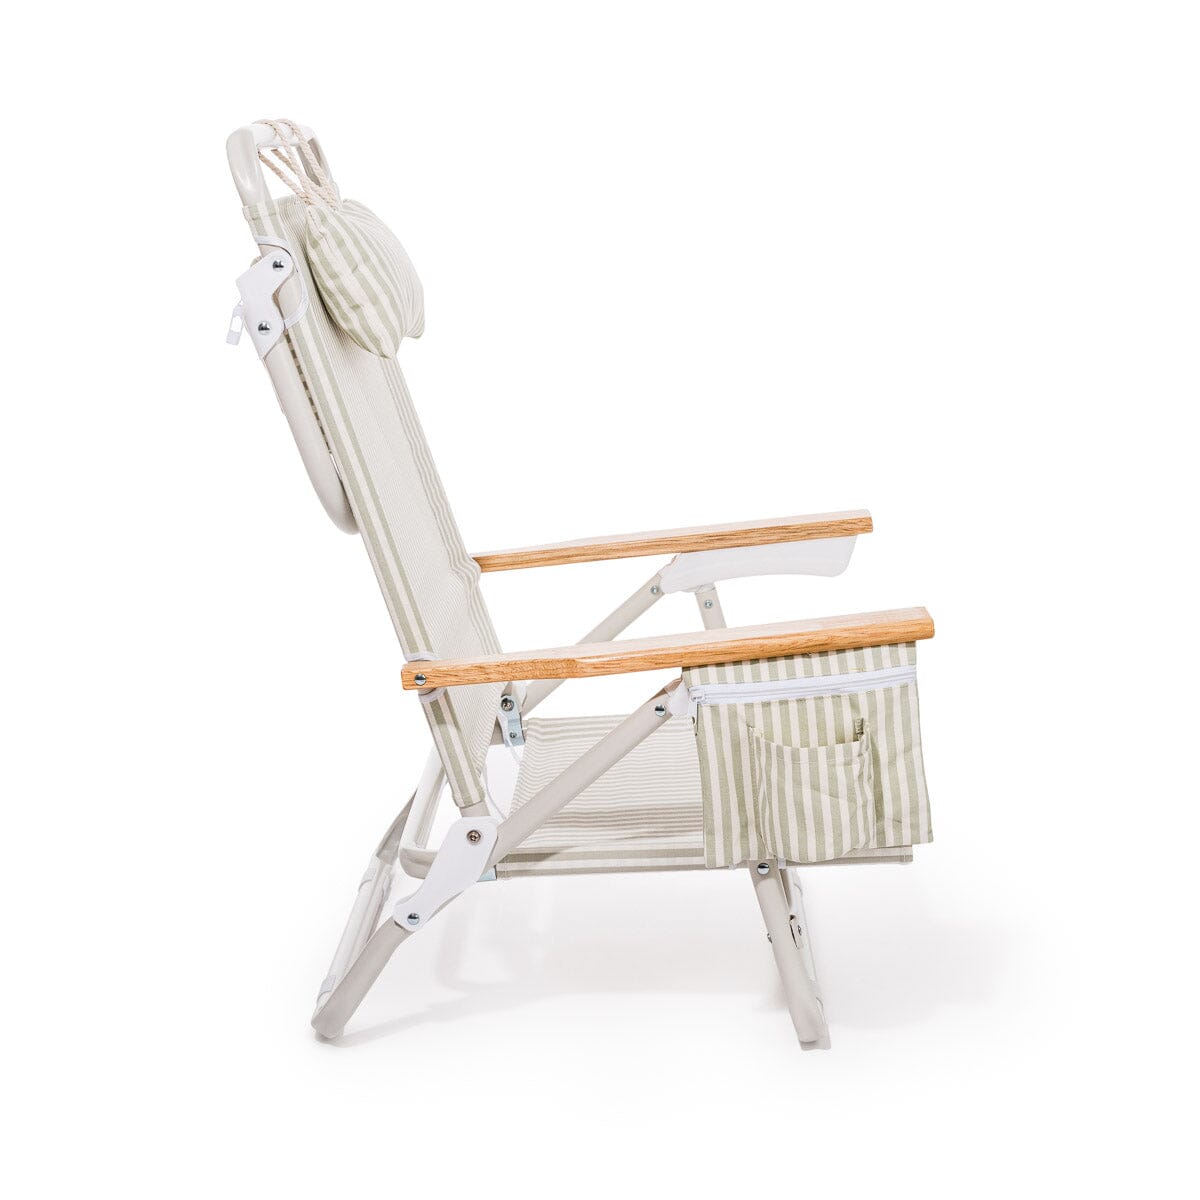 The Holiday Tommy Chair - Lauren's Sage Stripe Holiday Tommy Chair Business & Pleasure Co. 